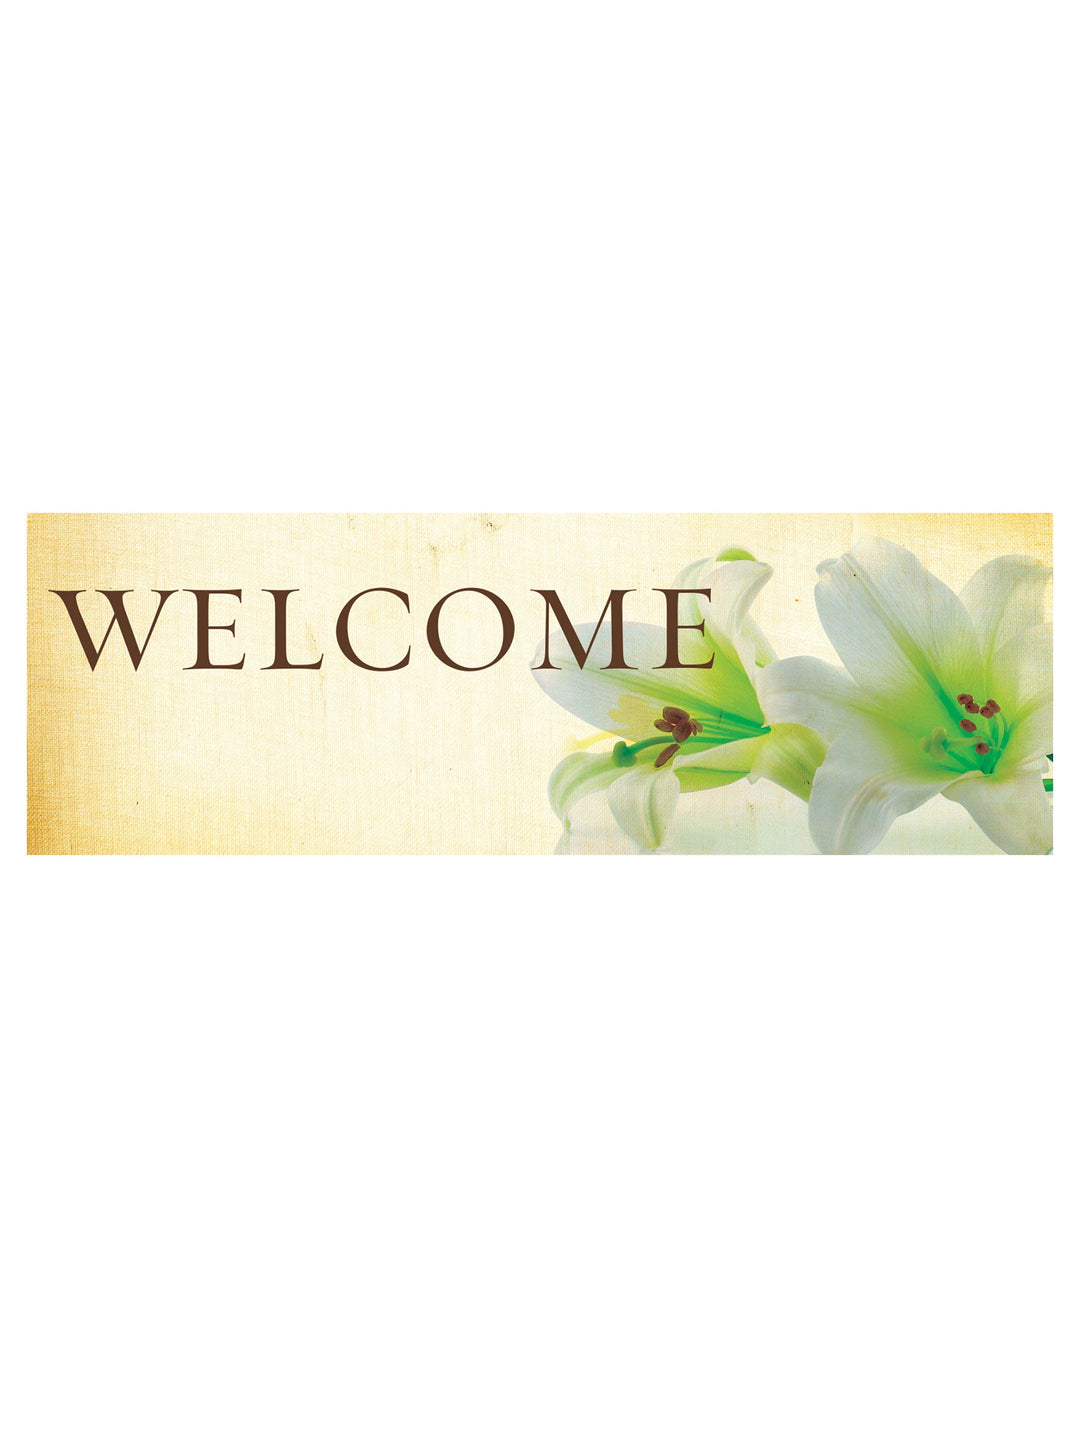 Custom Welcome Banner with horizontal layout with two Easter Lily Blooms on right edge of linen-look banner background